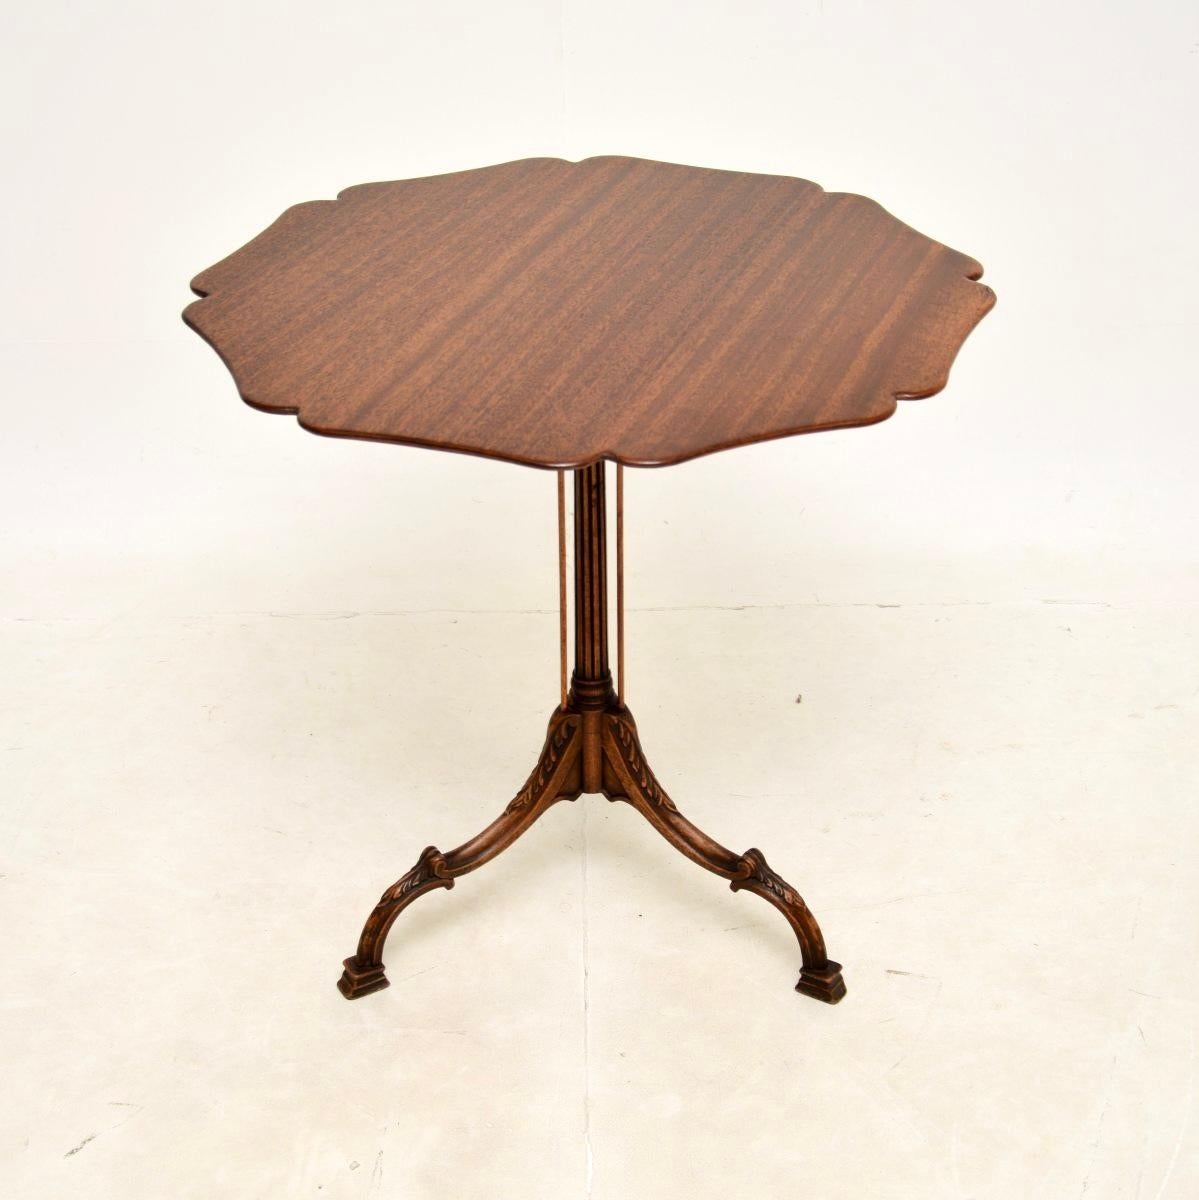 A fantastic antique Georgian Style tilt top table. This was made in England & we would date it from around the 1930-50’s period.

It is of extremely fine quality and has an unusual and refined design. The top has a very thin edge and is beautifully